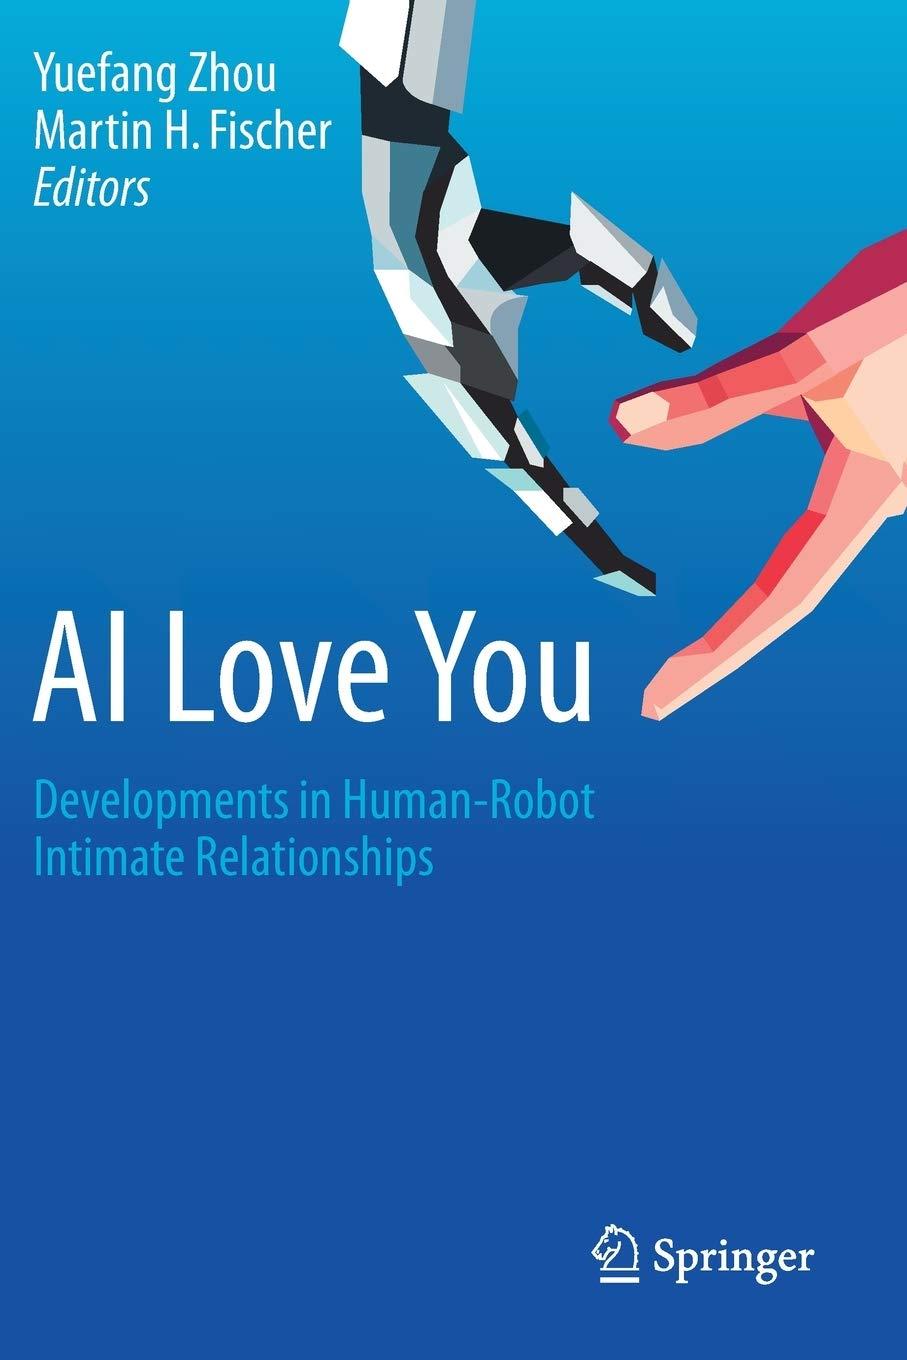 ai love you developments in human-robot intimate relationships 1st edition yuefang zhou , martin h. fischer